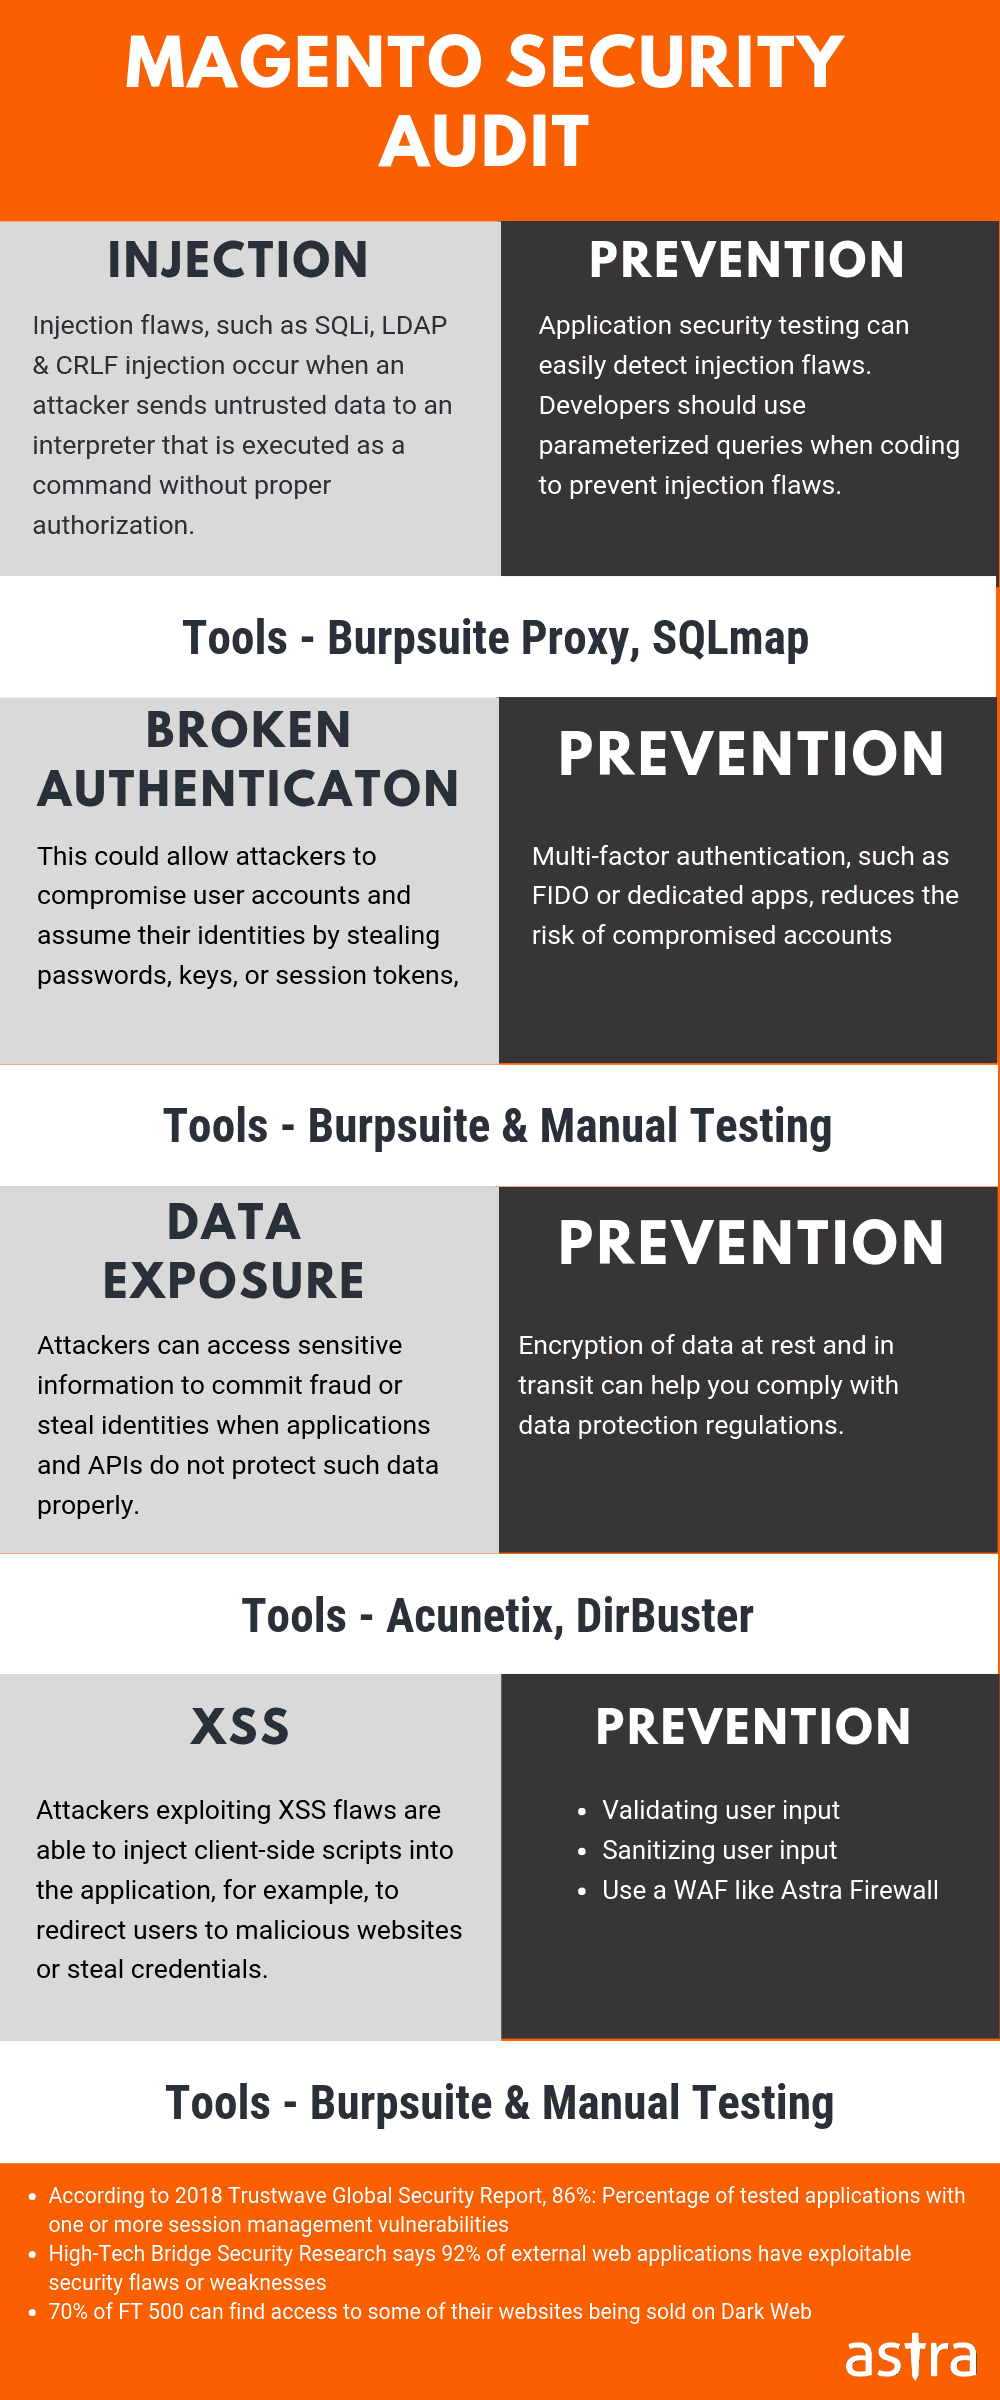 Magento security audit